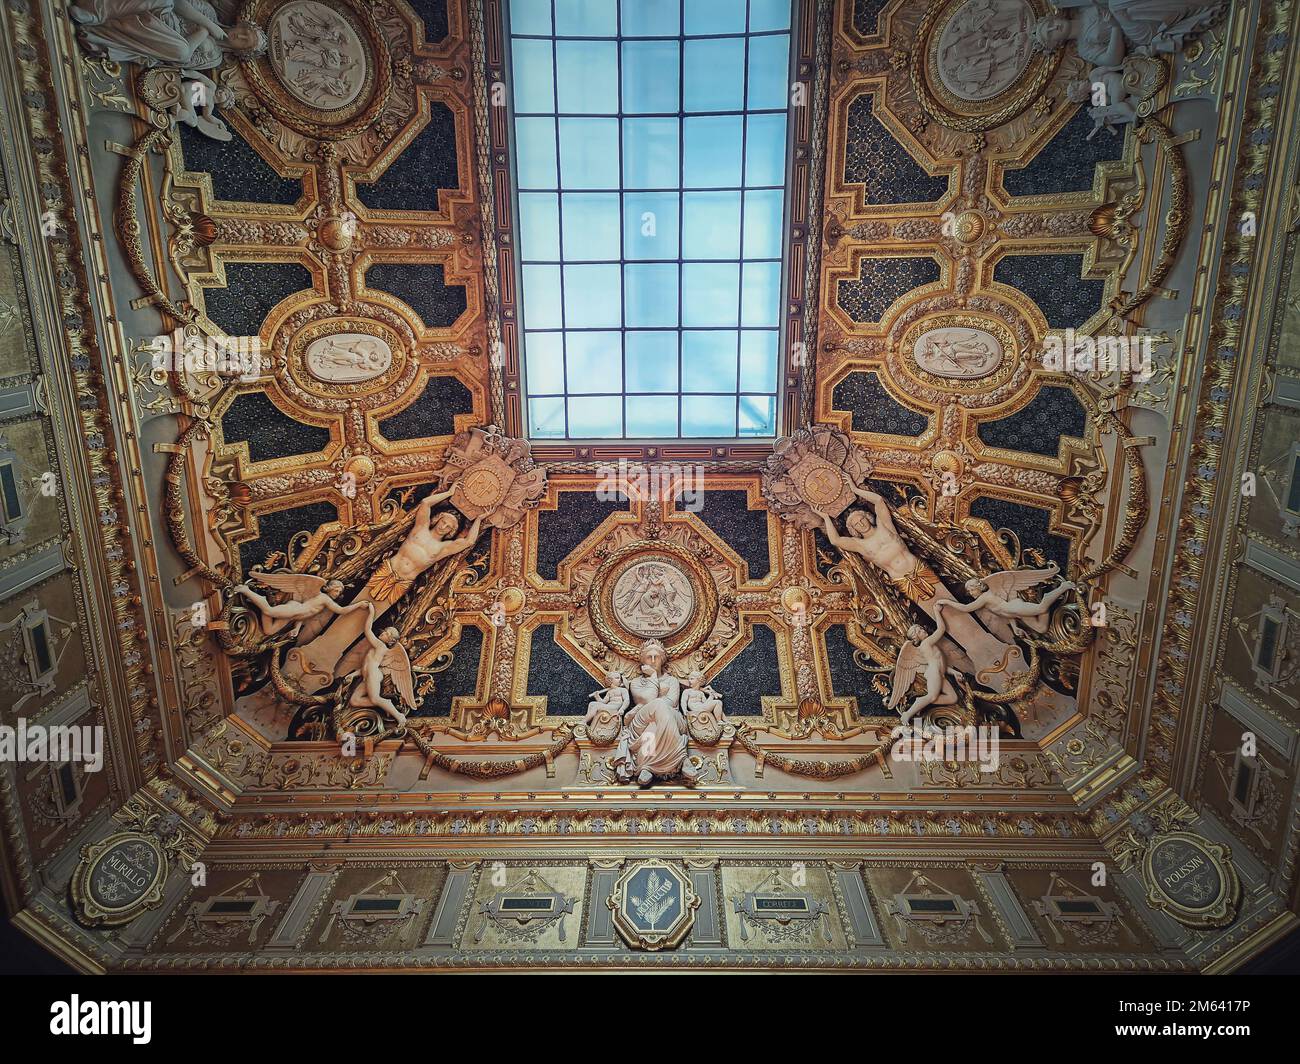 Golden ceiling with architectural details of the Salon Carre inside ...